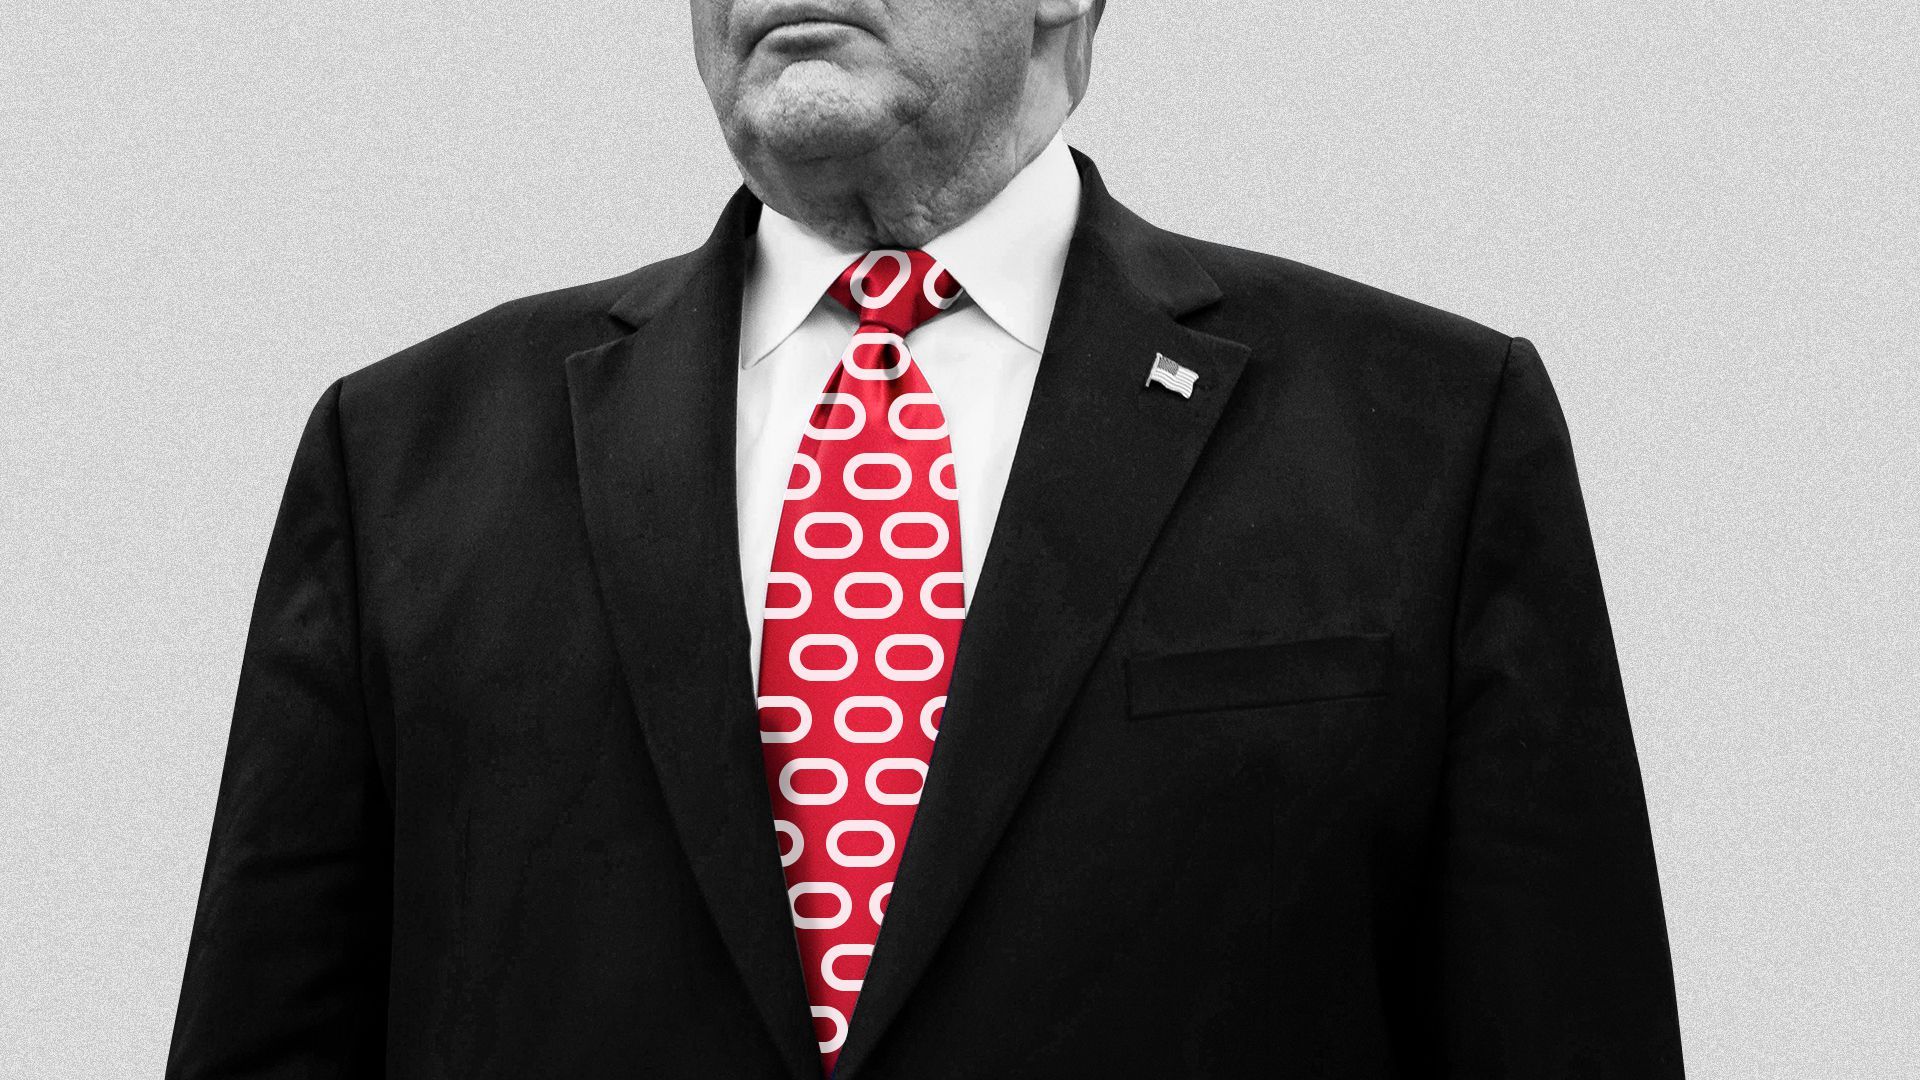 A photo illustration of President Trump wearing a red tie emblazoned with the Oracle logo.